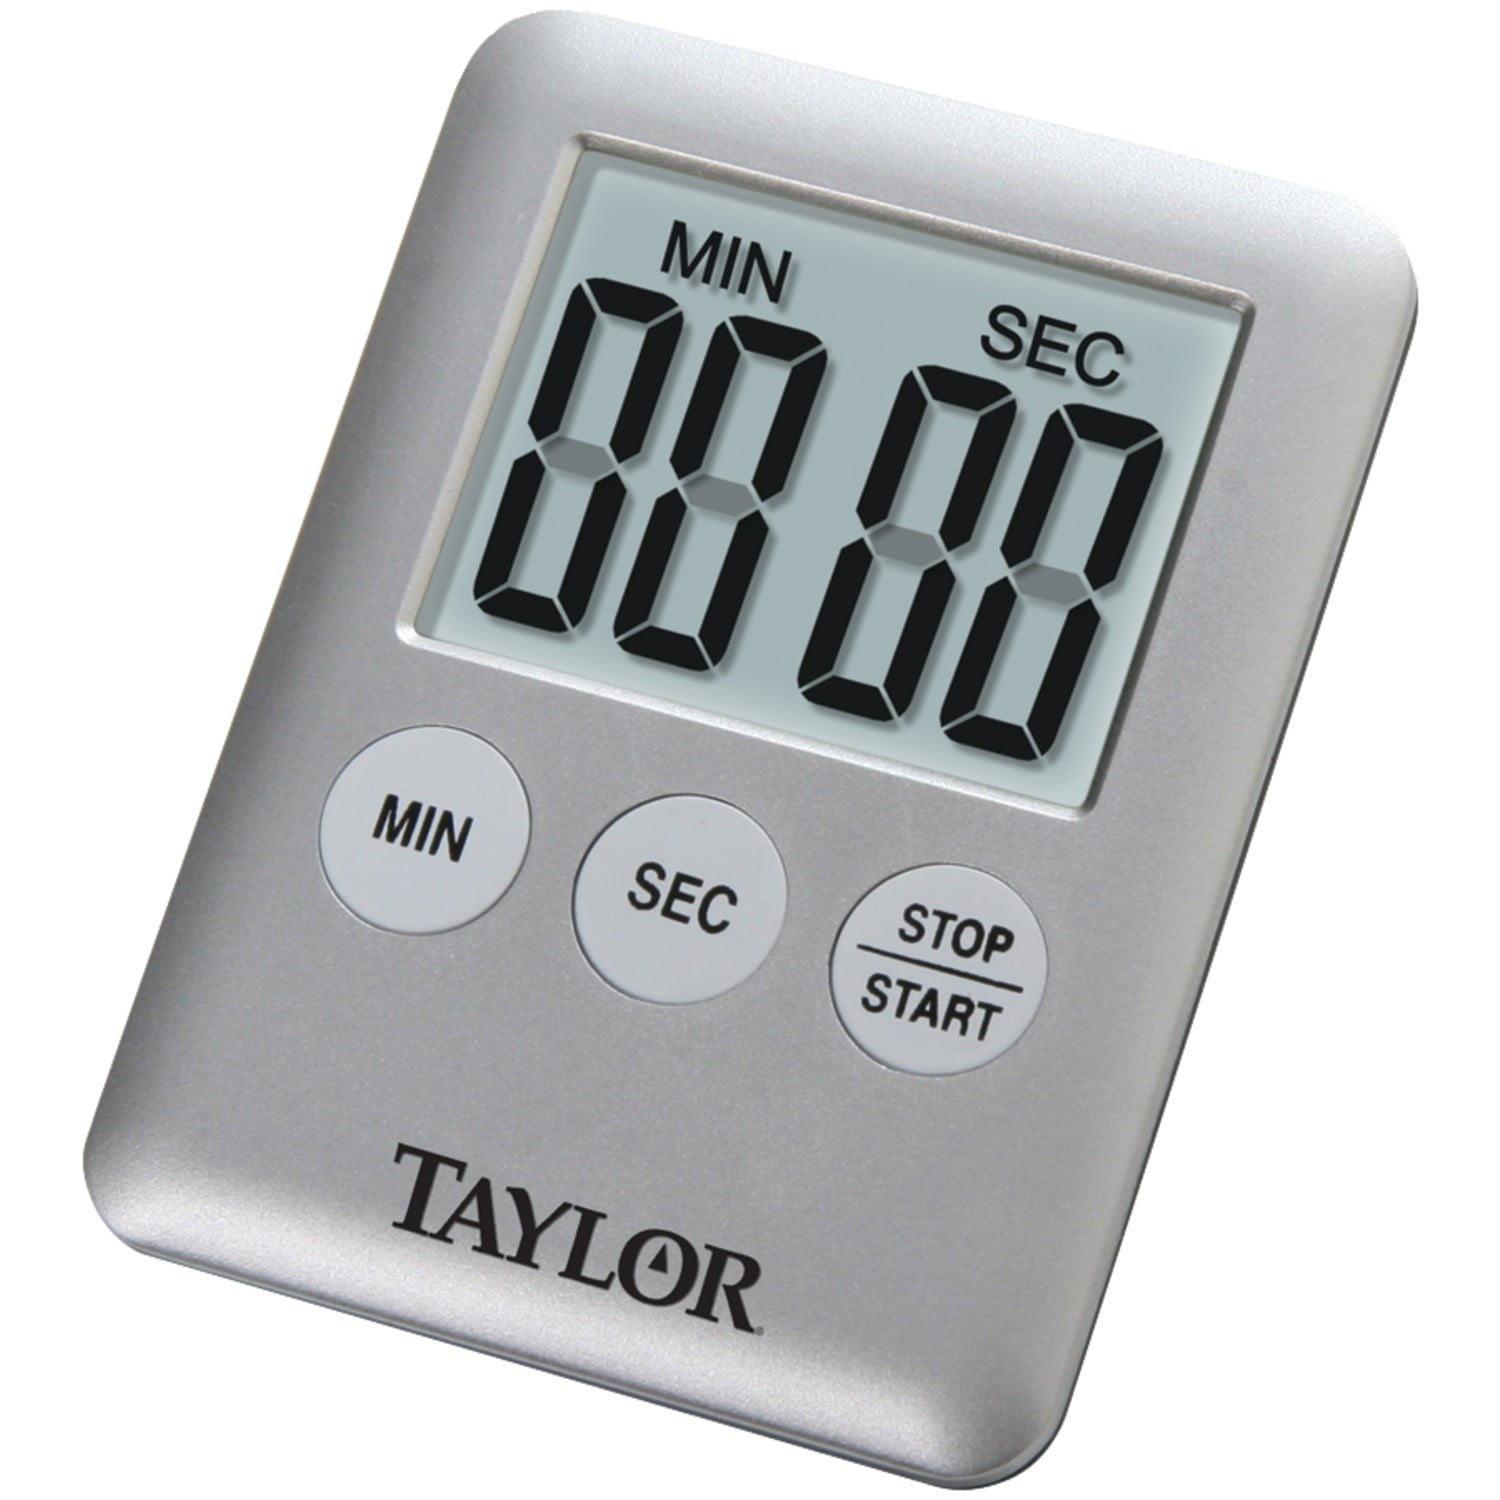 Taylor Precision Products Digital Food Timer Super-Loud Easy-to-Read Screen